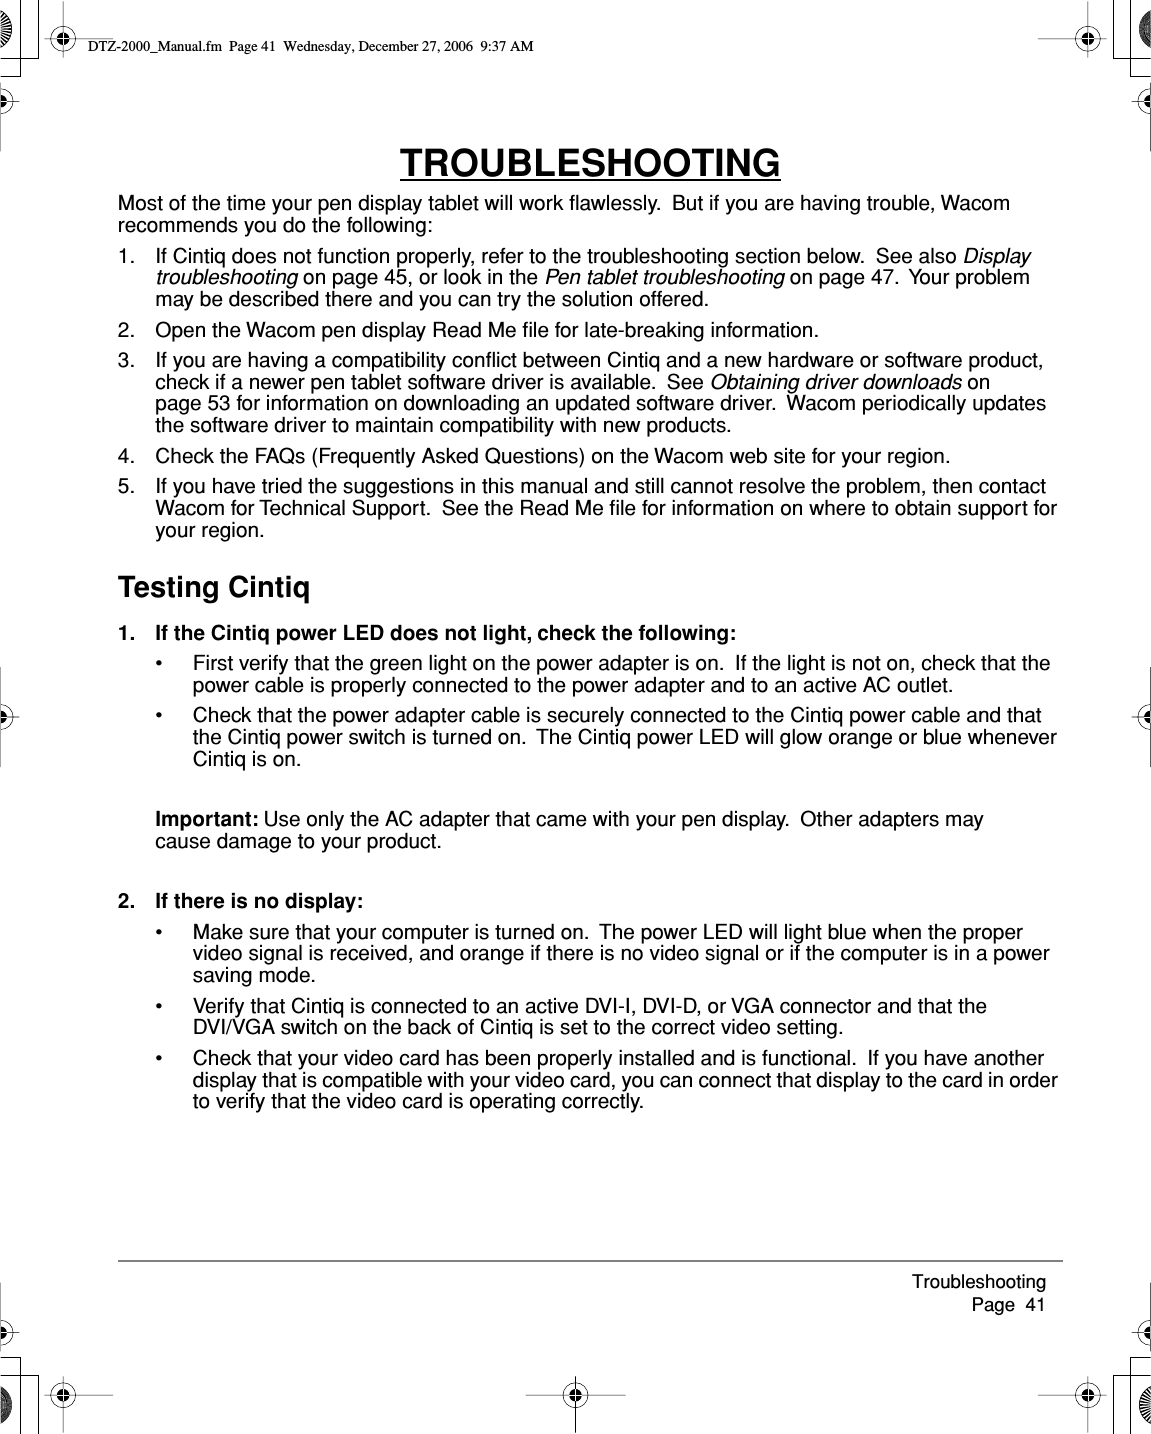 Troubleshooting     Page  41TROUBLESHOOTINGMost of the time your pen display tablet will work ﬂawlessly.  But if you are having trouble, Wacom recommends you do the following:1. If Cintiq does not function properly, refer to the troubleshooting section below.  See also Display troubleshooting on page 45, or look in the Pen tablet troubleshooting on page 47.  Your problem may be described there and you can try the solution offered.2. Open the Wacom pen display Read Me ﬁle for late-breaking information.3. If you are having a compatibility conﬂict between Cintiq and a new hardware or software product, check if a newer pen tablet software driver is available.  See Obtaining driver downloads on page 53 for information on downloading an updated software driver.  Wacom periodically updates the software driver to maintain compatibility with new products.4. Check the FAQs (Frequently Asked Questions) on the Wacom web site for your region.5. If you have tried the suggestions in this manual and still cannot resolve the problem, then contact Wacom for Technical Support.  See the Read Me ﬁle for information on where to obtain support for your region.Testing Cintiq1. If the Cintiq power LED does not light, check the following:• First verify that the green light on the power adapter is on.  If the light is not on, check that the power cable is properly connected to the power adapter and to an active AC outlet.• Check that the power adapter cable is securely connected to the Cintiq power cable and that the Cintiq power switch is turned on.  The Cintiq power LED will glow orange or blue whenever Cintiq is on.Important: Use only the AC adapter that came with your pen display.  Other adapters may cause damage to your product.2. If there is no display:• Make sure that your computer is turned on.  The power LED will light blue when the proper video signal is received, and orange if there is no video signal or if the computer is in a power saving mode.• Verify that Cintiq is connected to an active DVI-I, DVI-D, or VGA connector and that the DVI/VGA switch on the back of Cintiq is set to the correct video setting.• Check that your video card has been properly installed and is functional.  If you have another display that is compatible with your video card, you can connect that display to the card in order to verify that the video card is operating correctly.DTZ-2000_Manual.fm  Page 41  Wednesday, December 27, 2006  9:37 AM